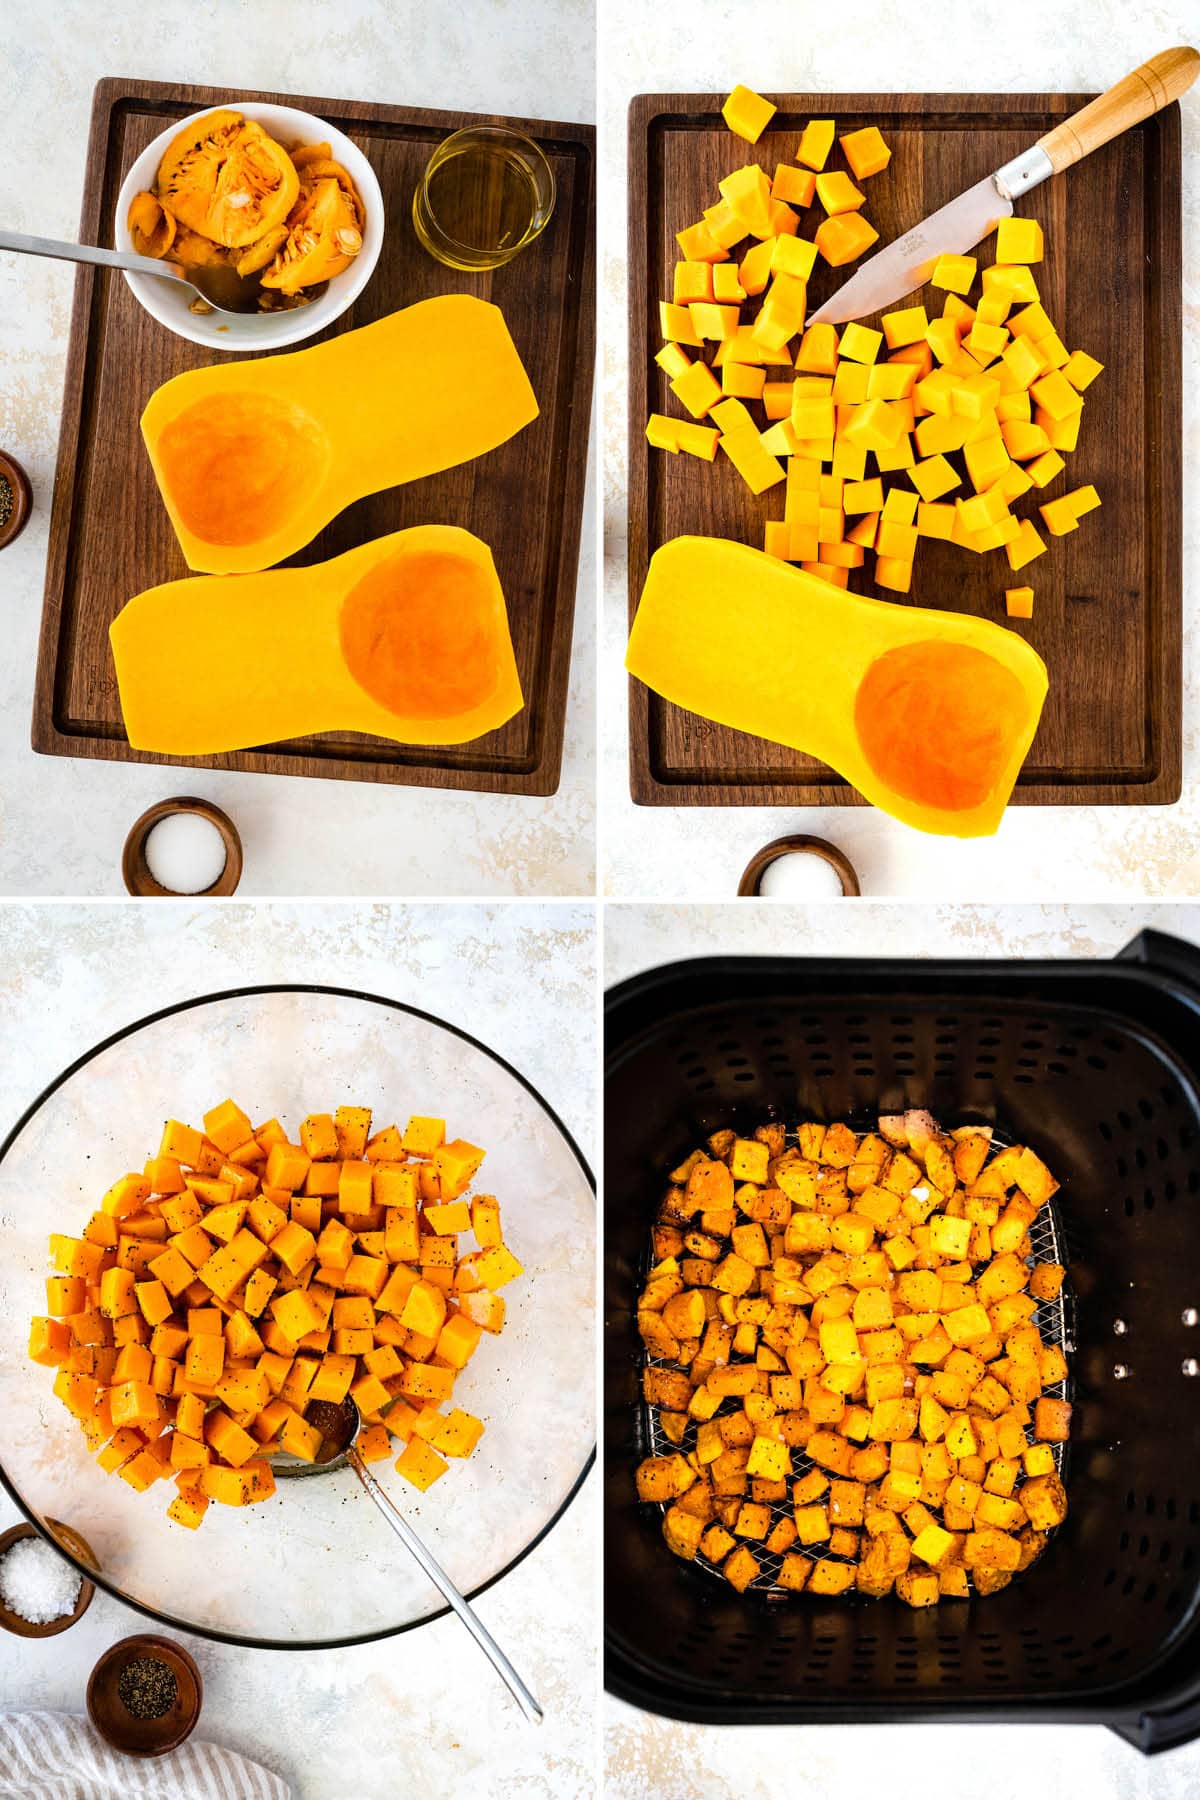 Four photos showing the steps to make Air Fryer Butternut Squash: scooping seeds out of the squash, cutting into cubes, tossing with oil, salt and pepper and then cooking in an air fryer basket.